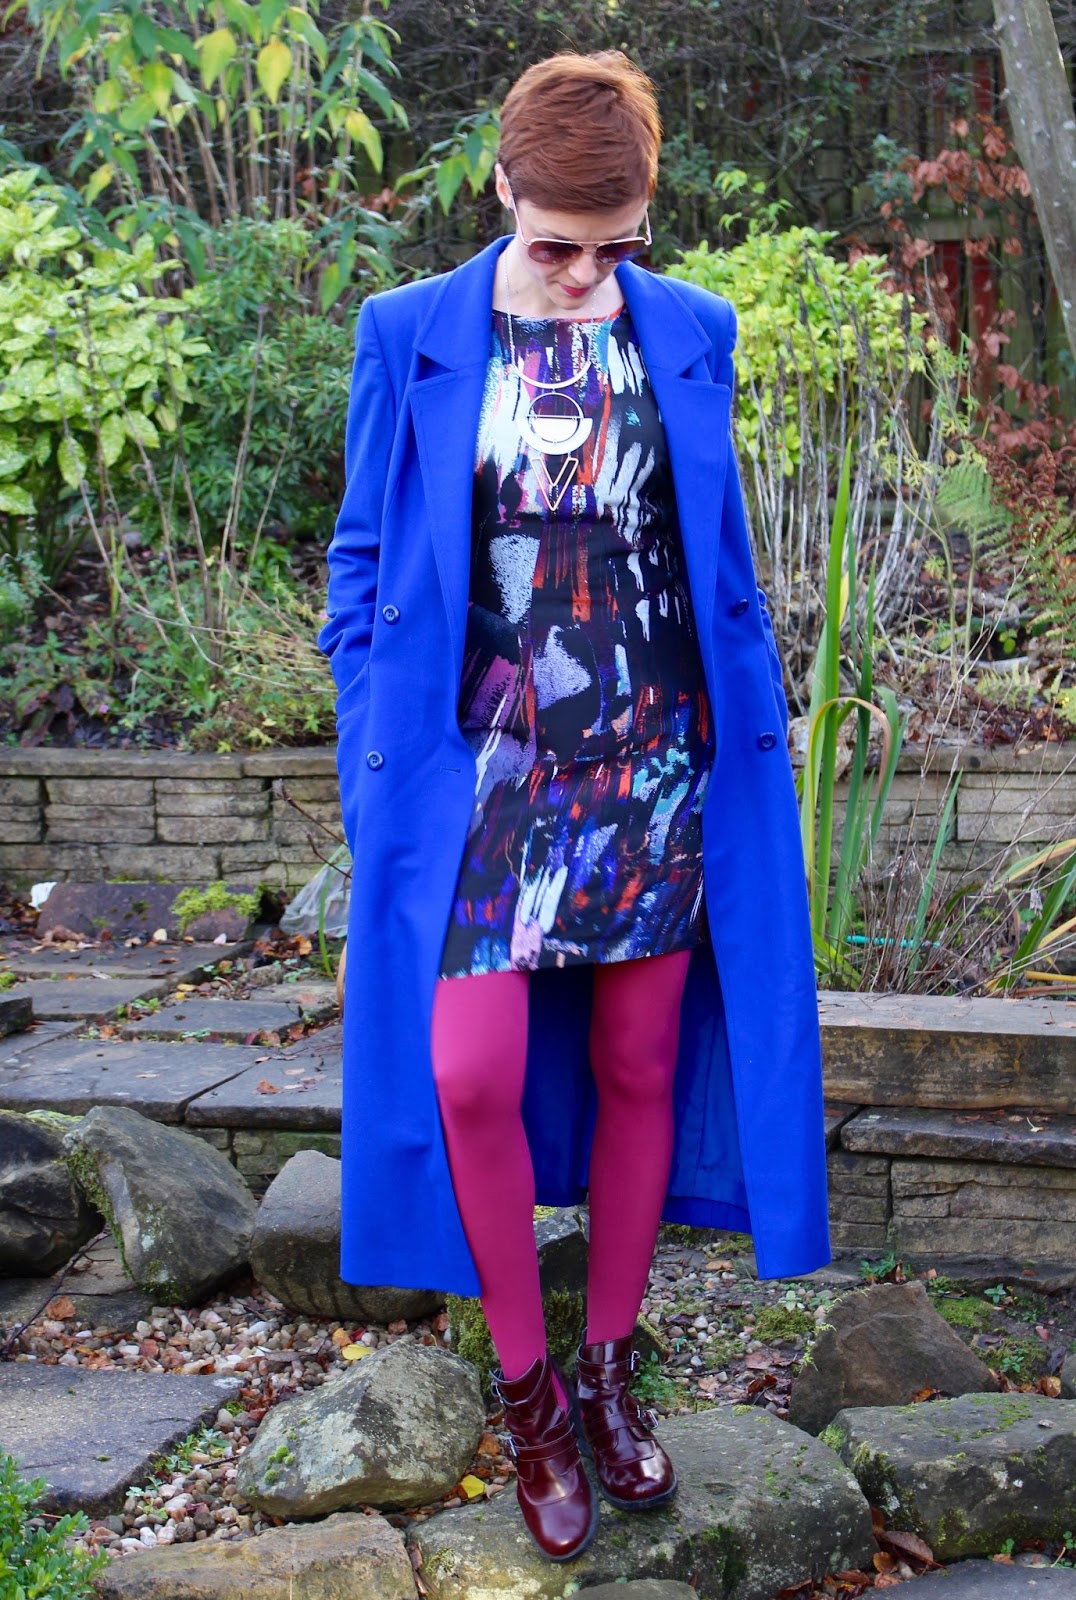 Wearing bright colours | Cobalt and pink | Fake fabulous